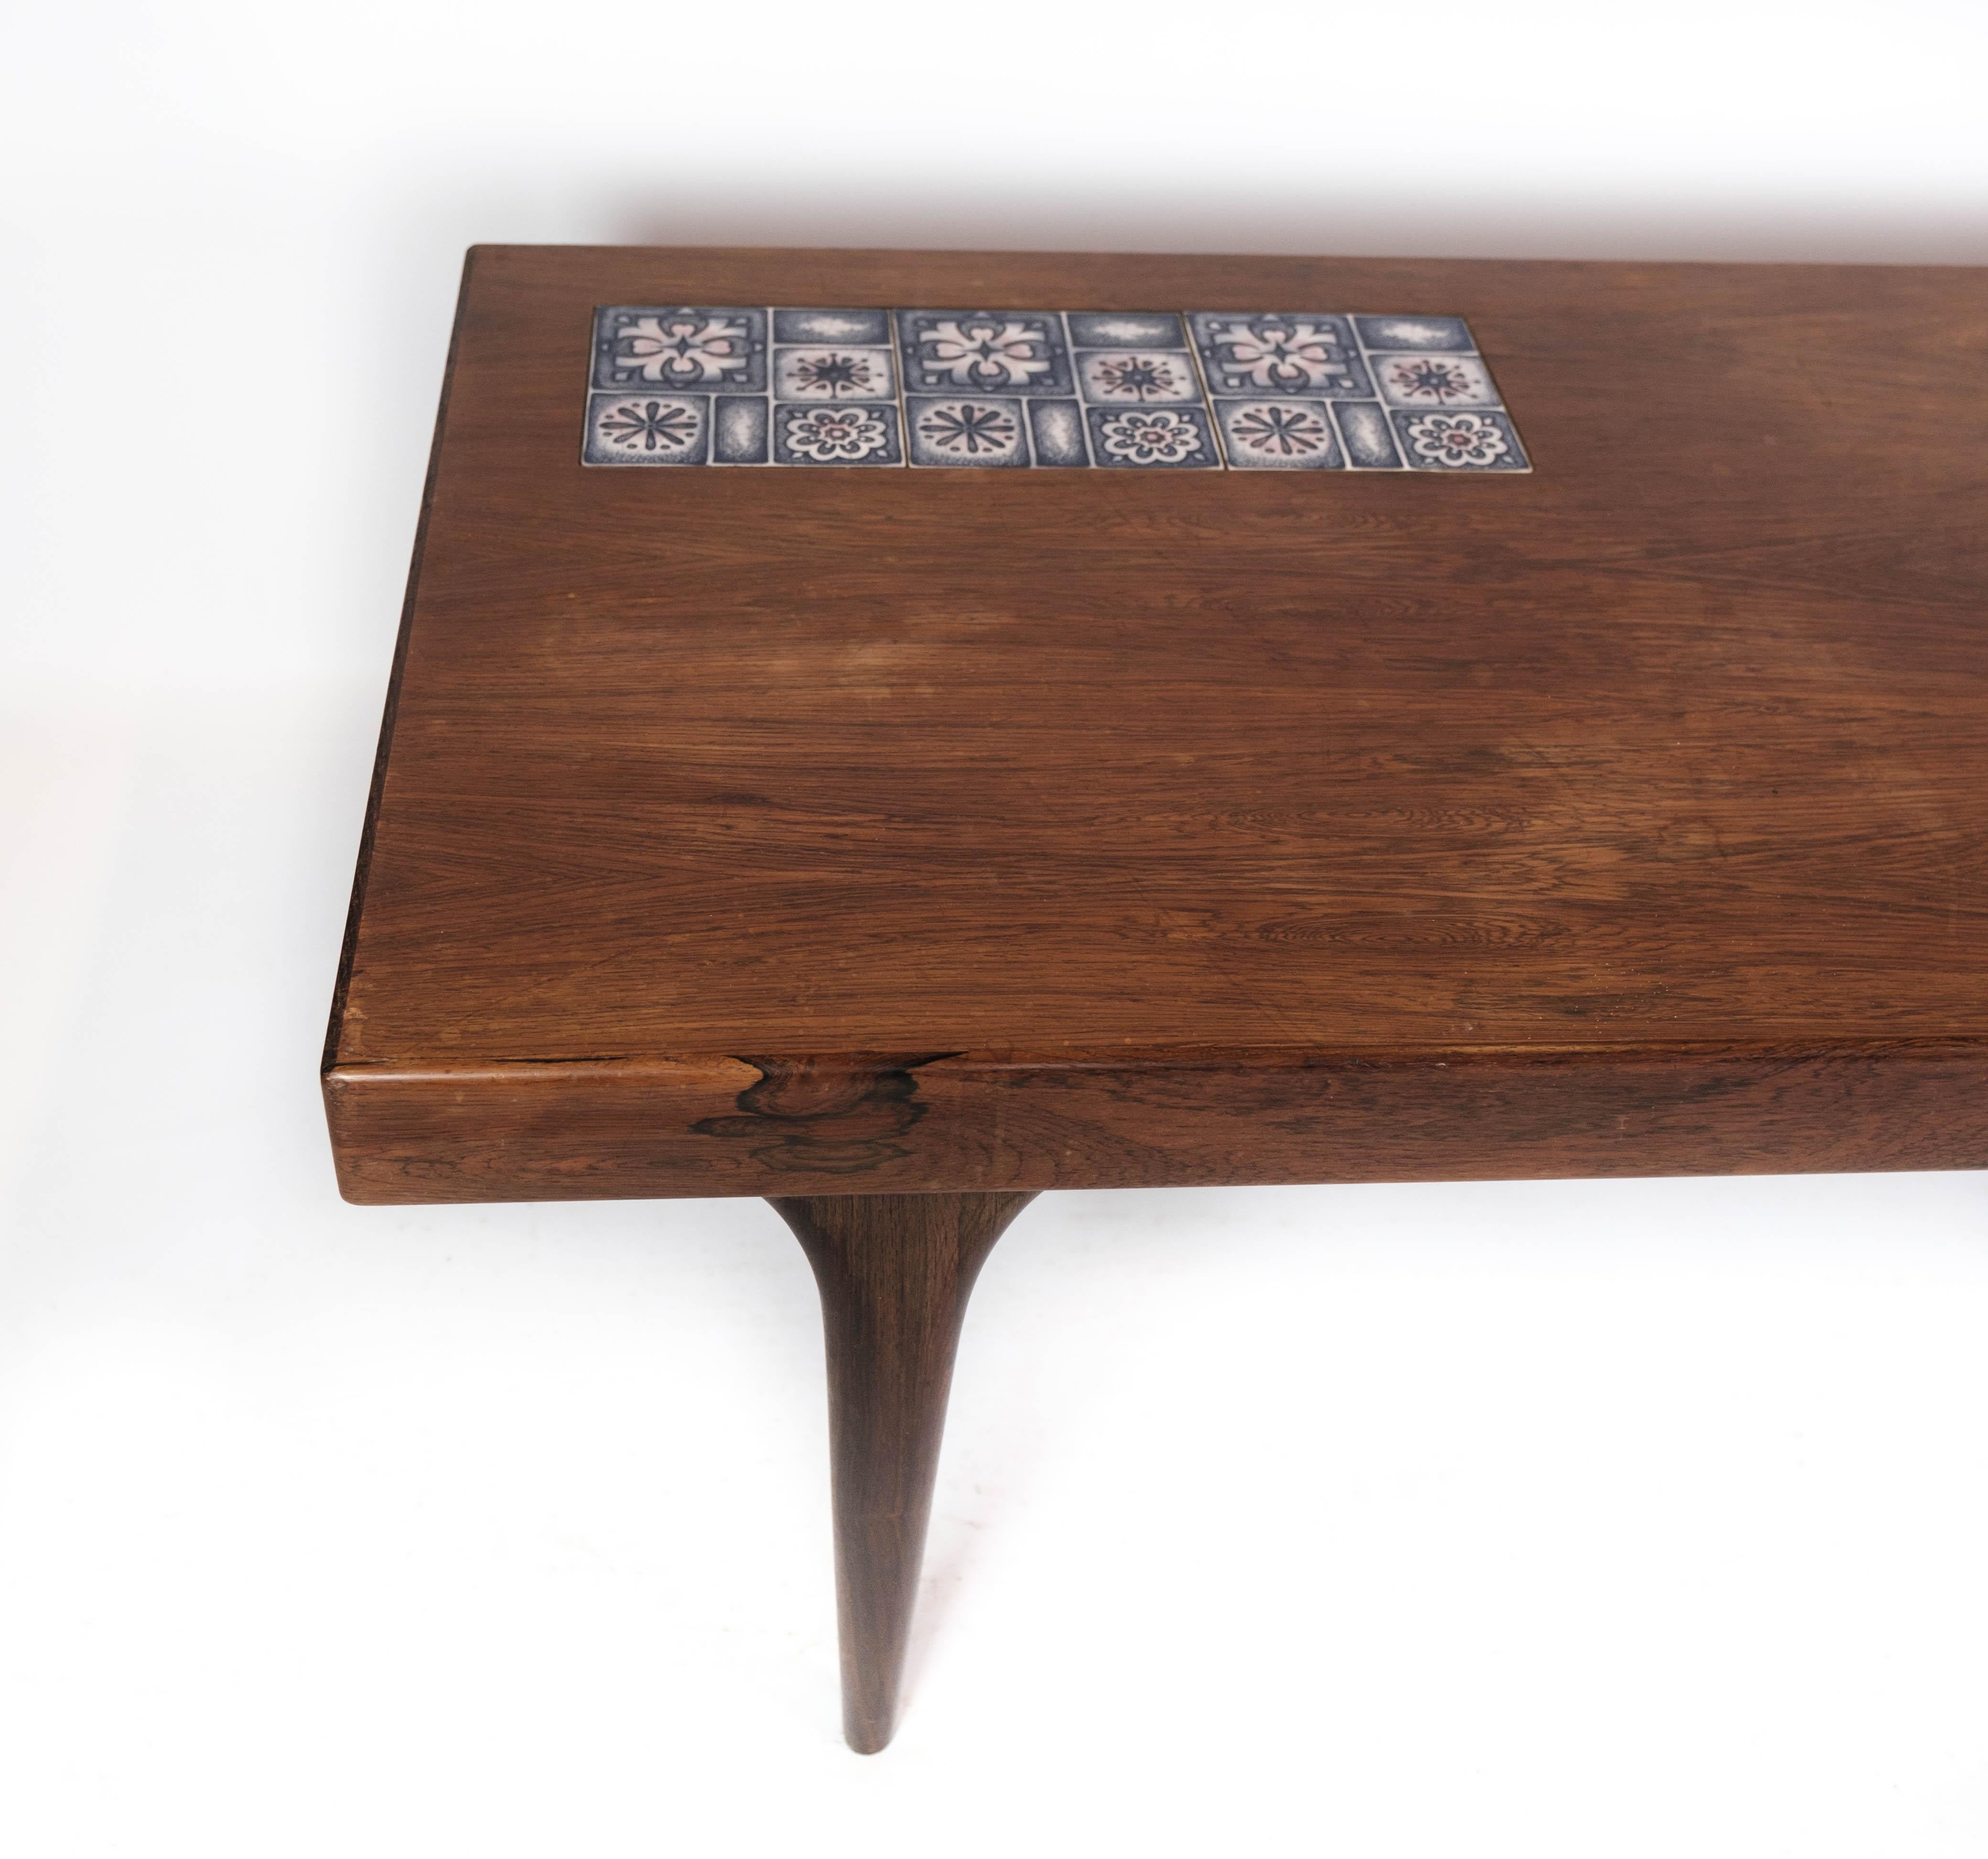 Danish Coffee Table Made In Rosewood With Blue Tiles by Johannes Andersen From 1960s For Sale